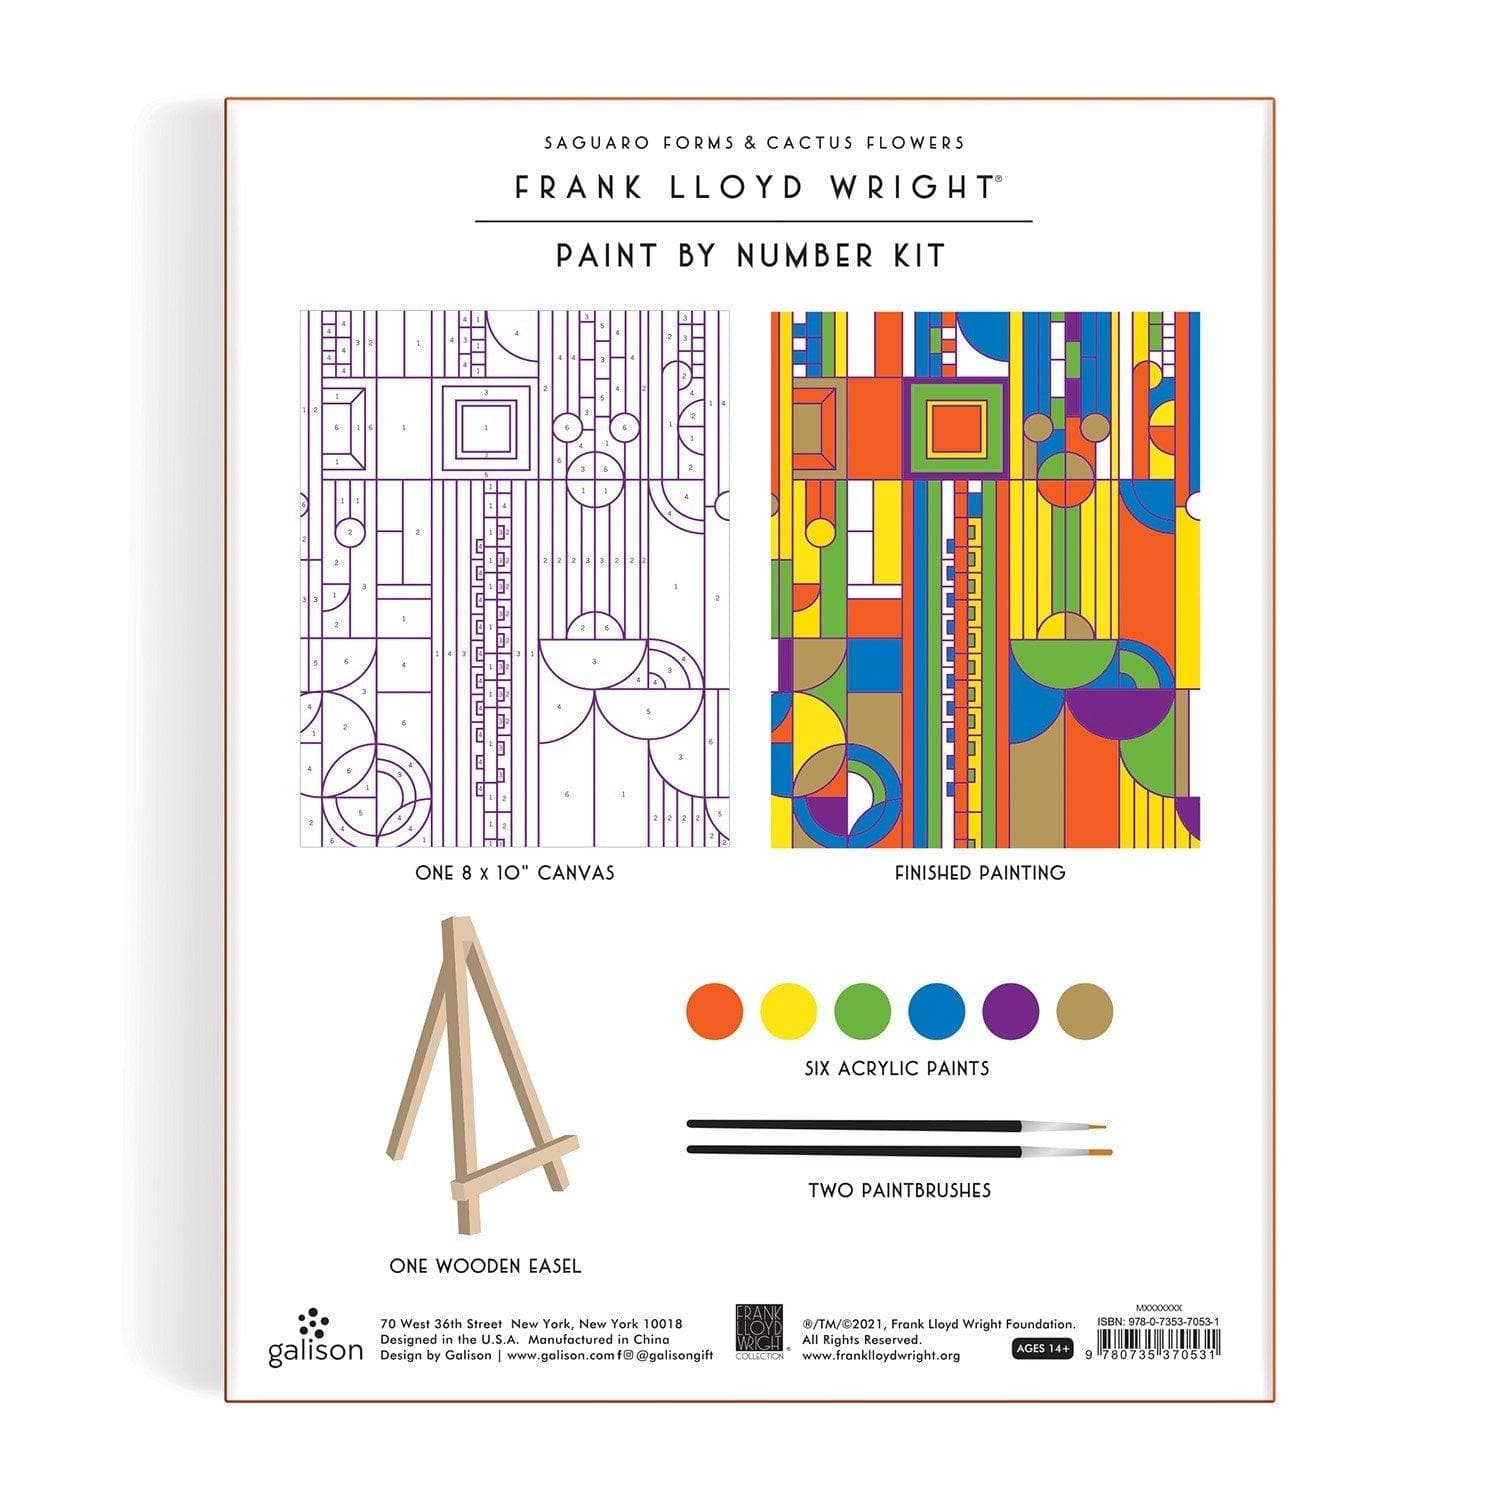 Frank Lloyd Wright Saguaro Cactus and Forms Paint By Number Kit Frank Lloyd Wright Saguaro Cactus and Forms Paint By Number Kit Frank Lloyd Wright Saguaro Cactus and Forms Paint By Number Kit 